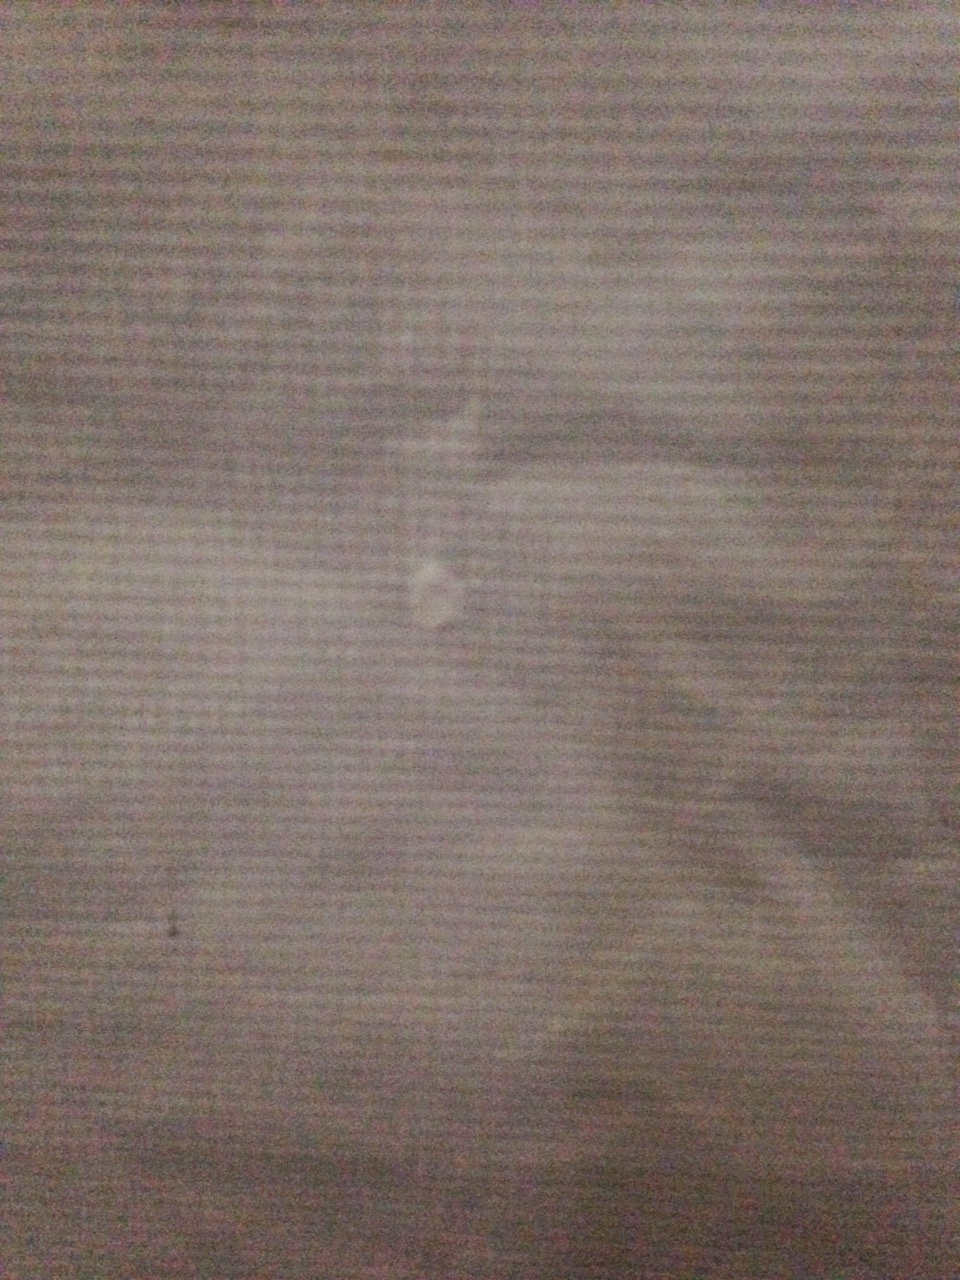 Tent fabric after pin hole repair